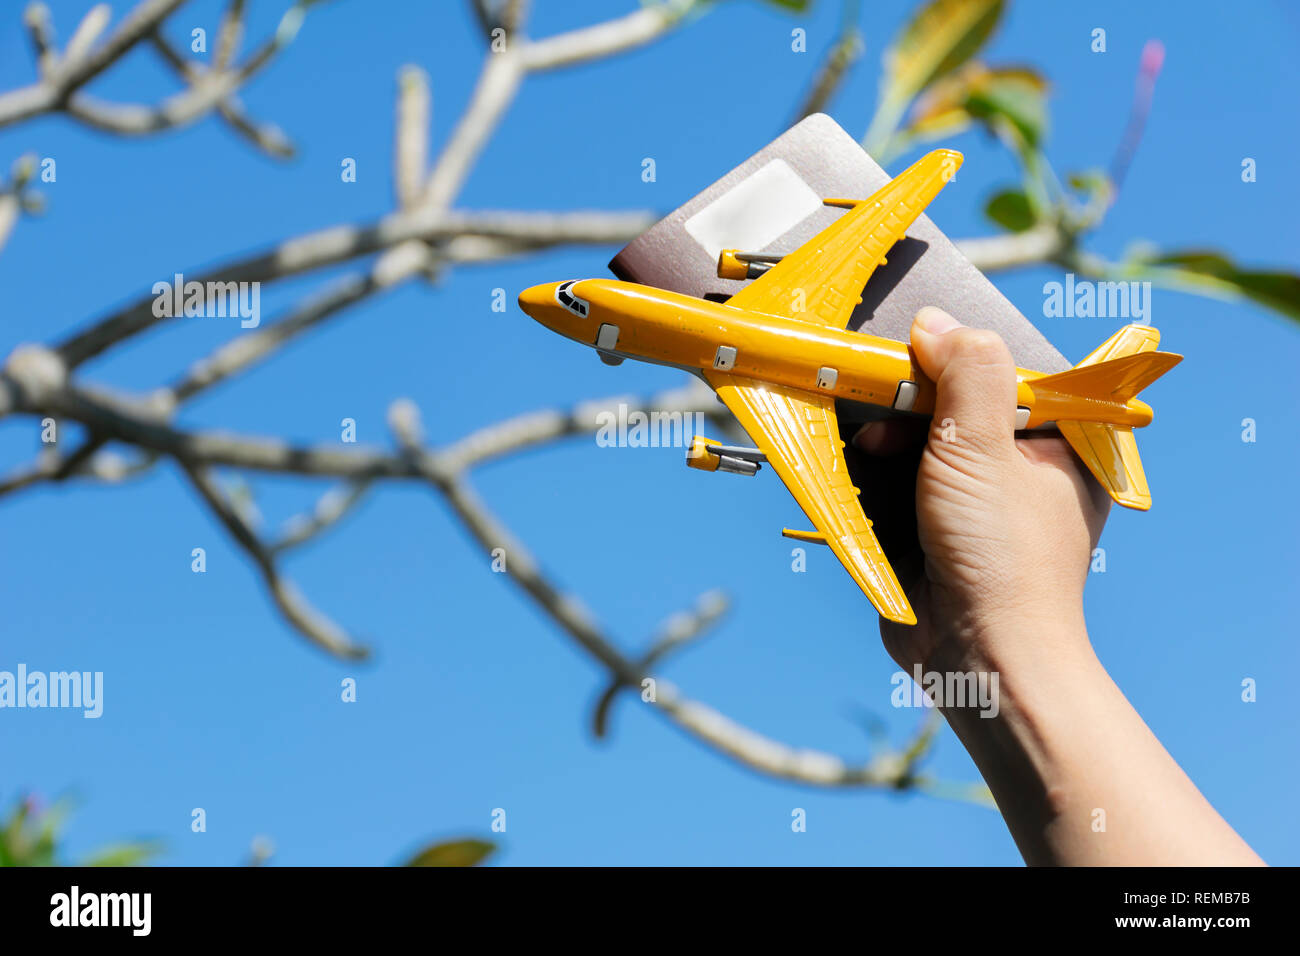 Traveling concept. A woman's hand holding a passport and a plane model. Travel by plane for speed and convenience. The background is the branches and  Stock Photo